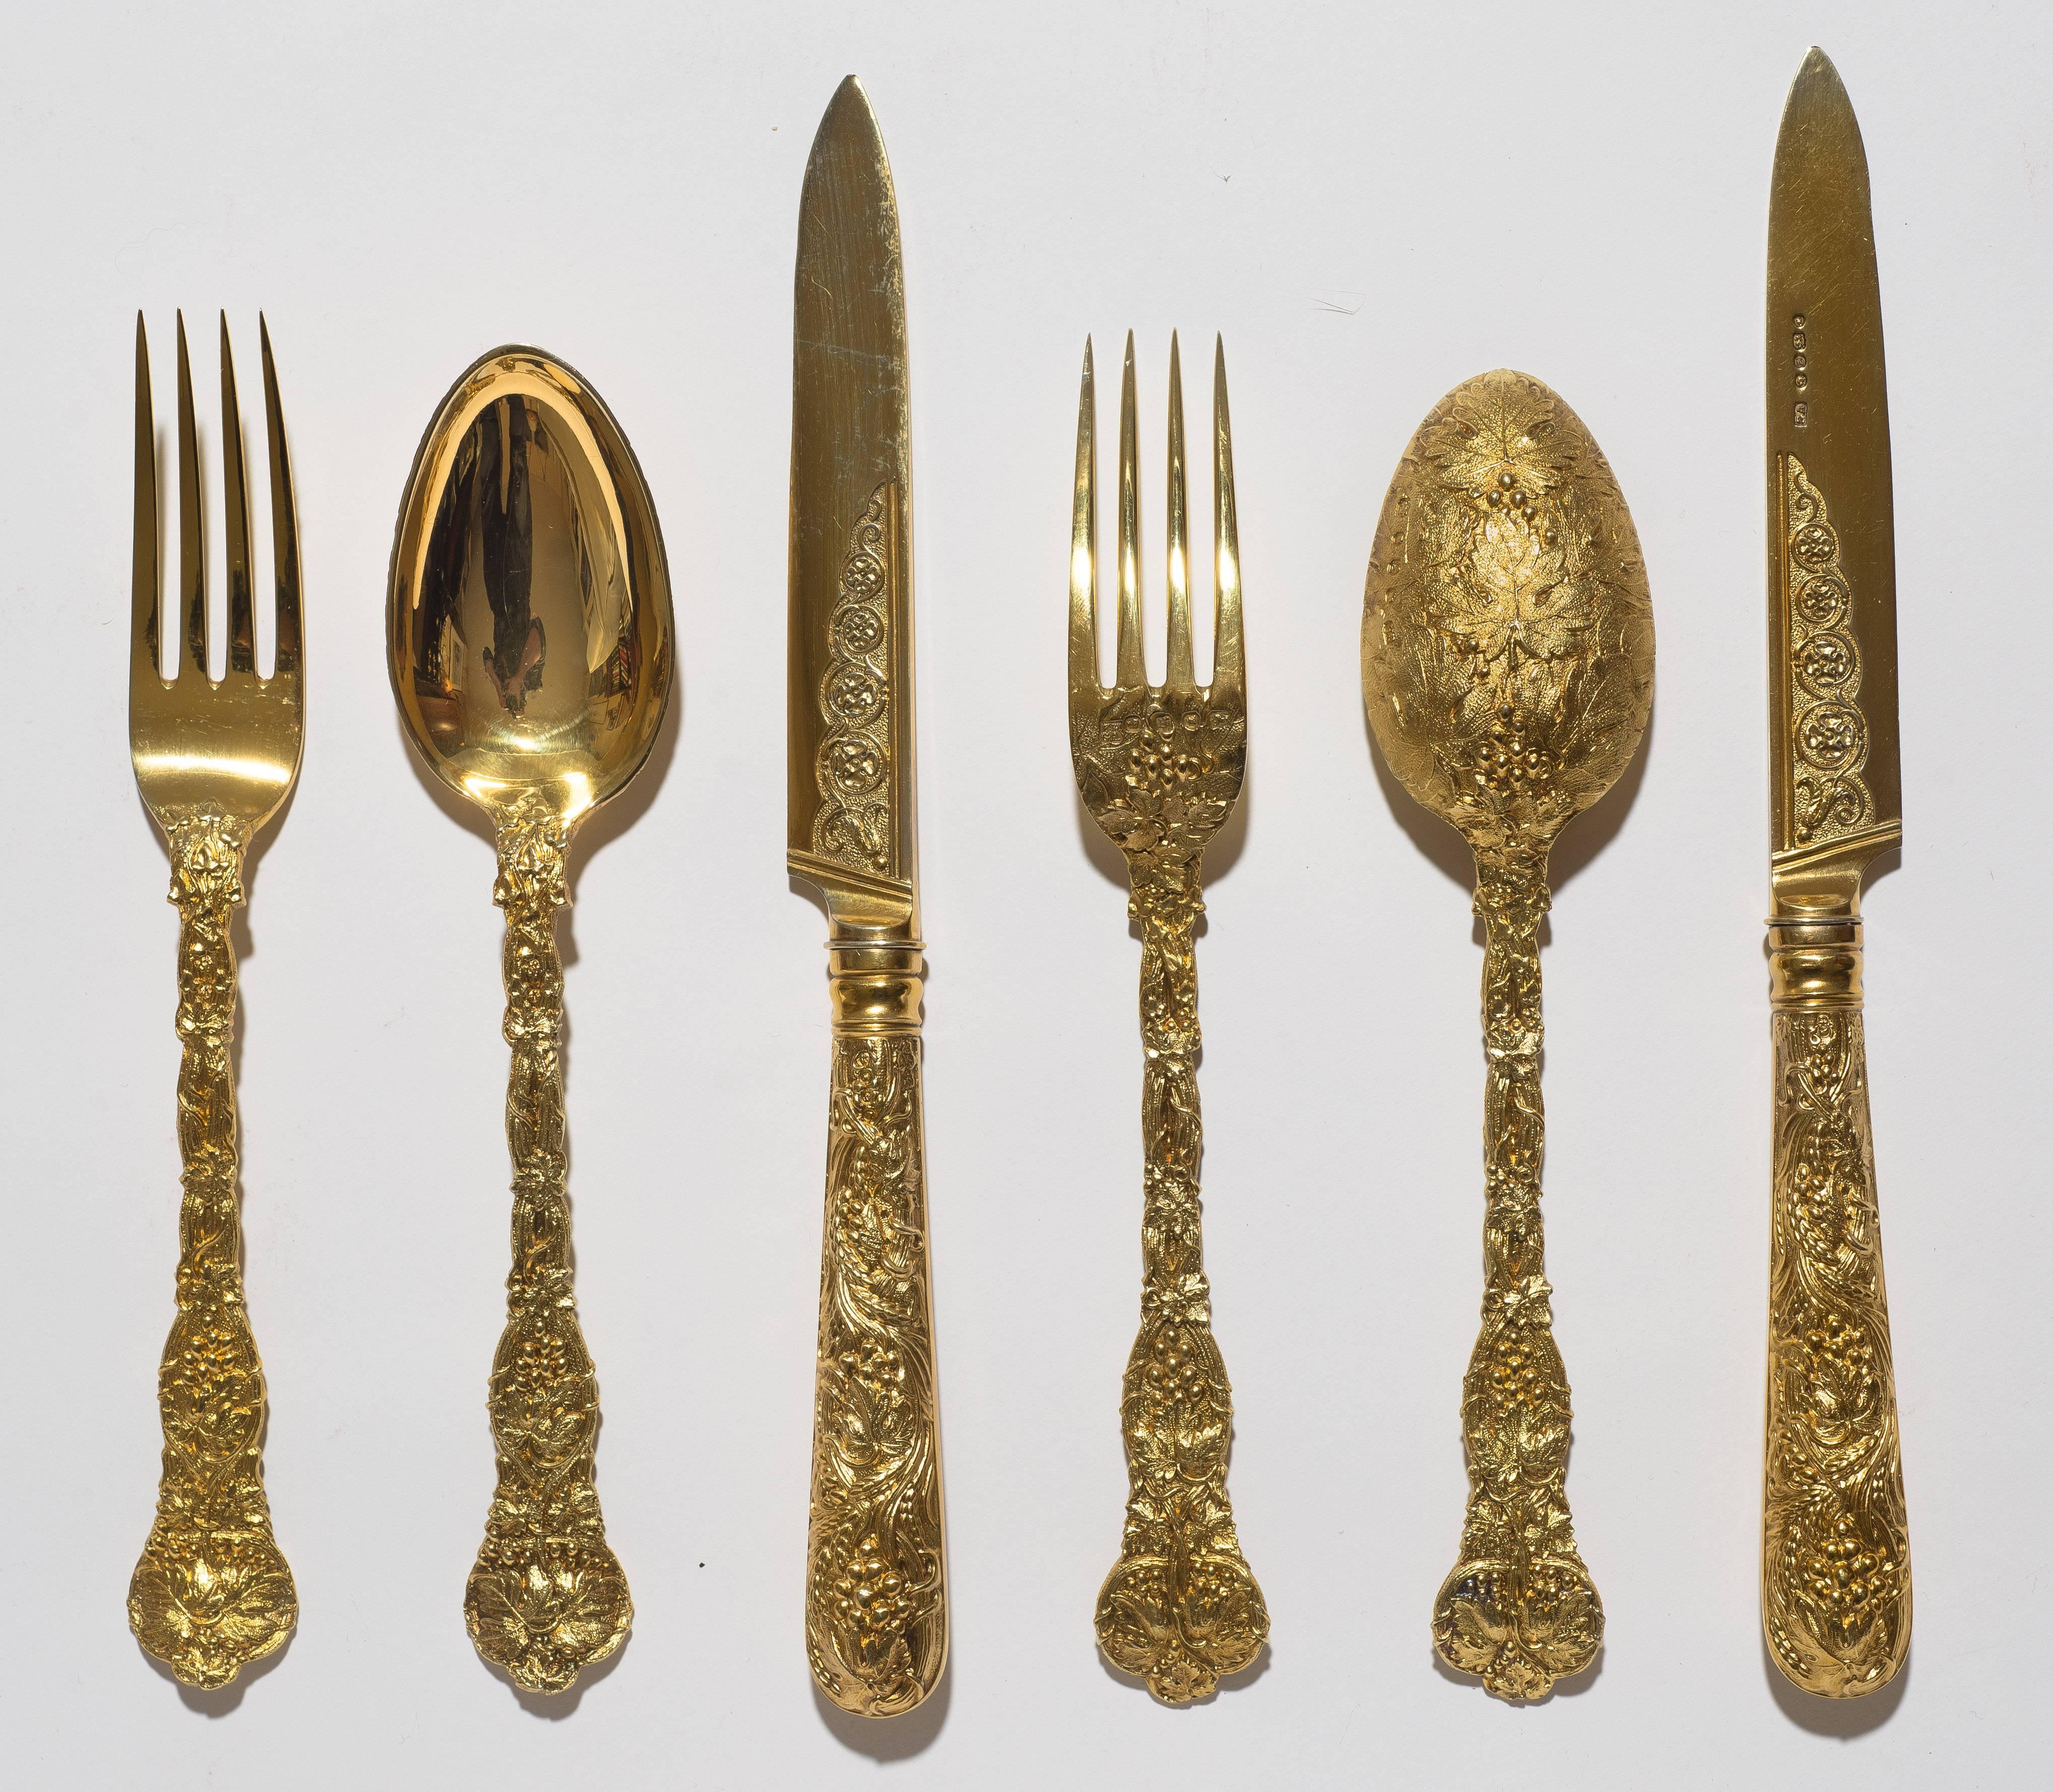 A SUPERB VICTORIAN SILVER-GILT SERVICE  Made by George Adams, London Hallmarks , beginning of the reign of Queen Victoria 1842 sold by Crown Jewellers Garrard & Co., Ltd. London. The service is similar to those used at the British Royal